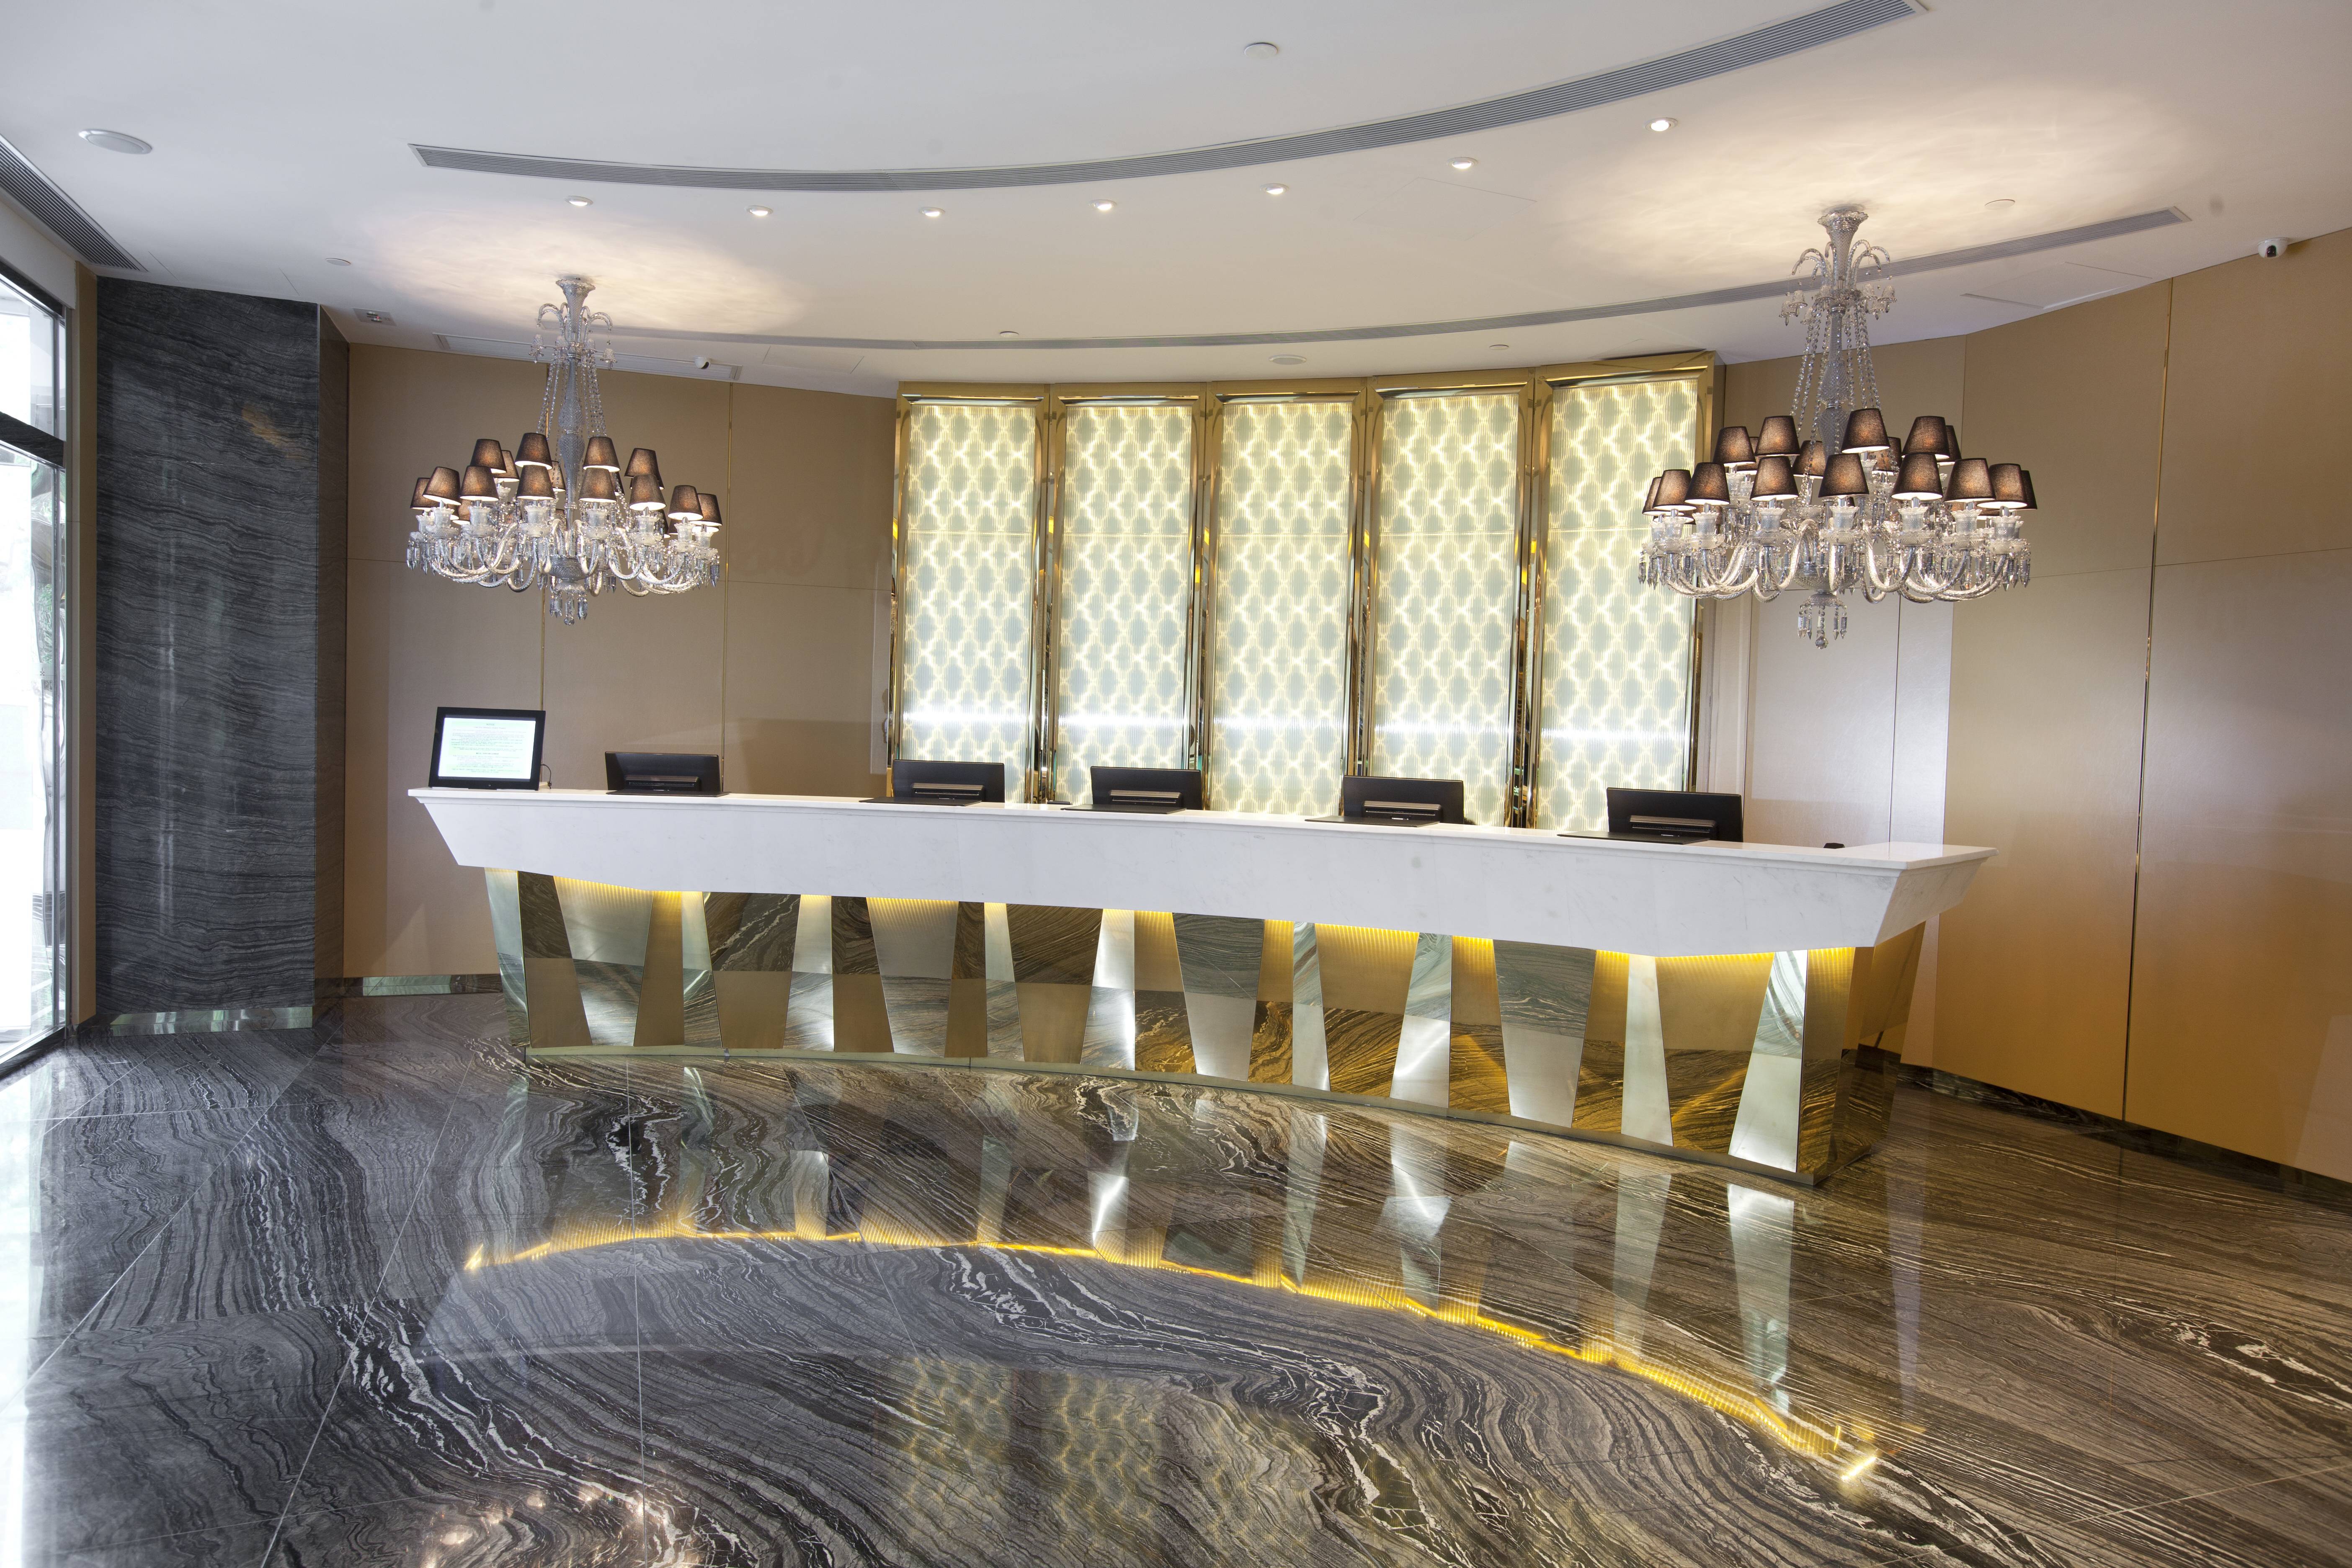 Lobby  Our spacious and welcoming lobby is stylishly designed and furnished